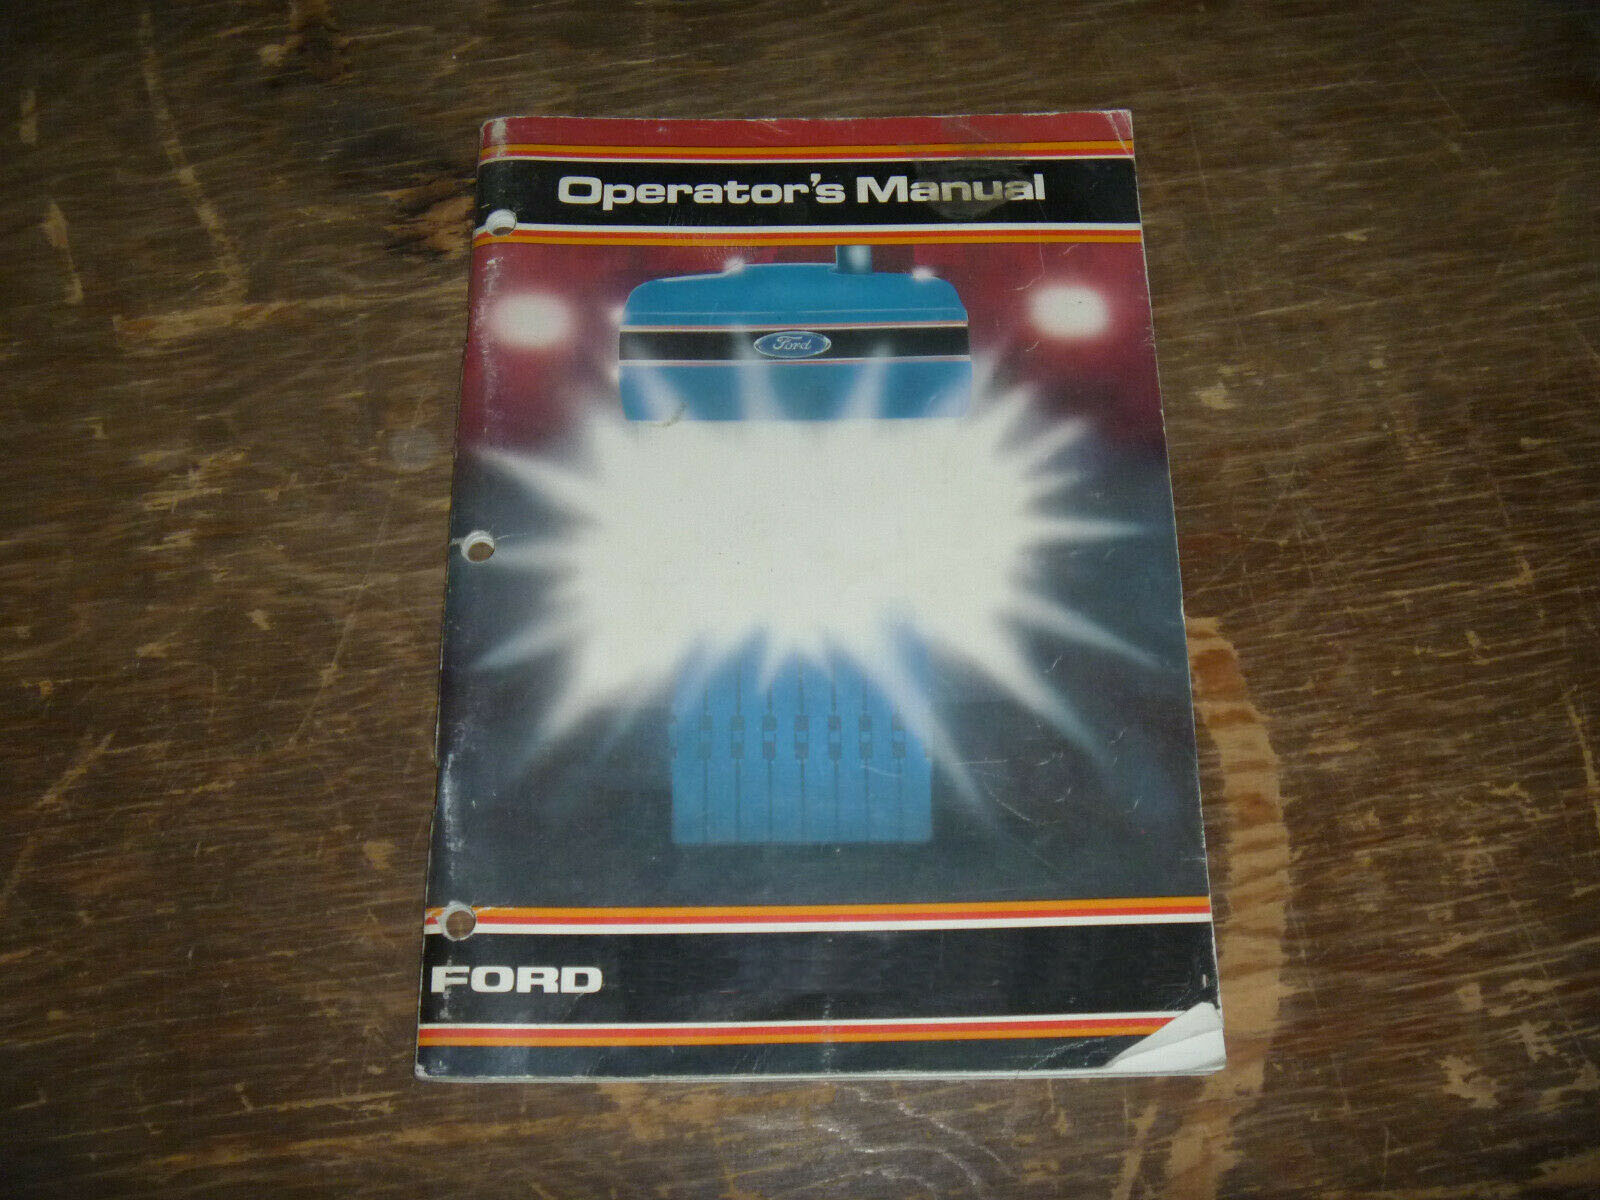 Operator's Manual for FORD Tractors model FW20